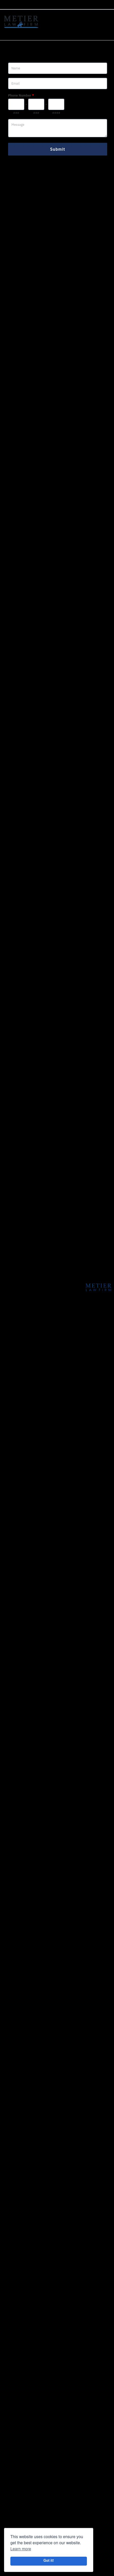 Metier Law Firm - Fort Collins CO Lawyers